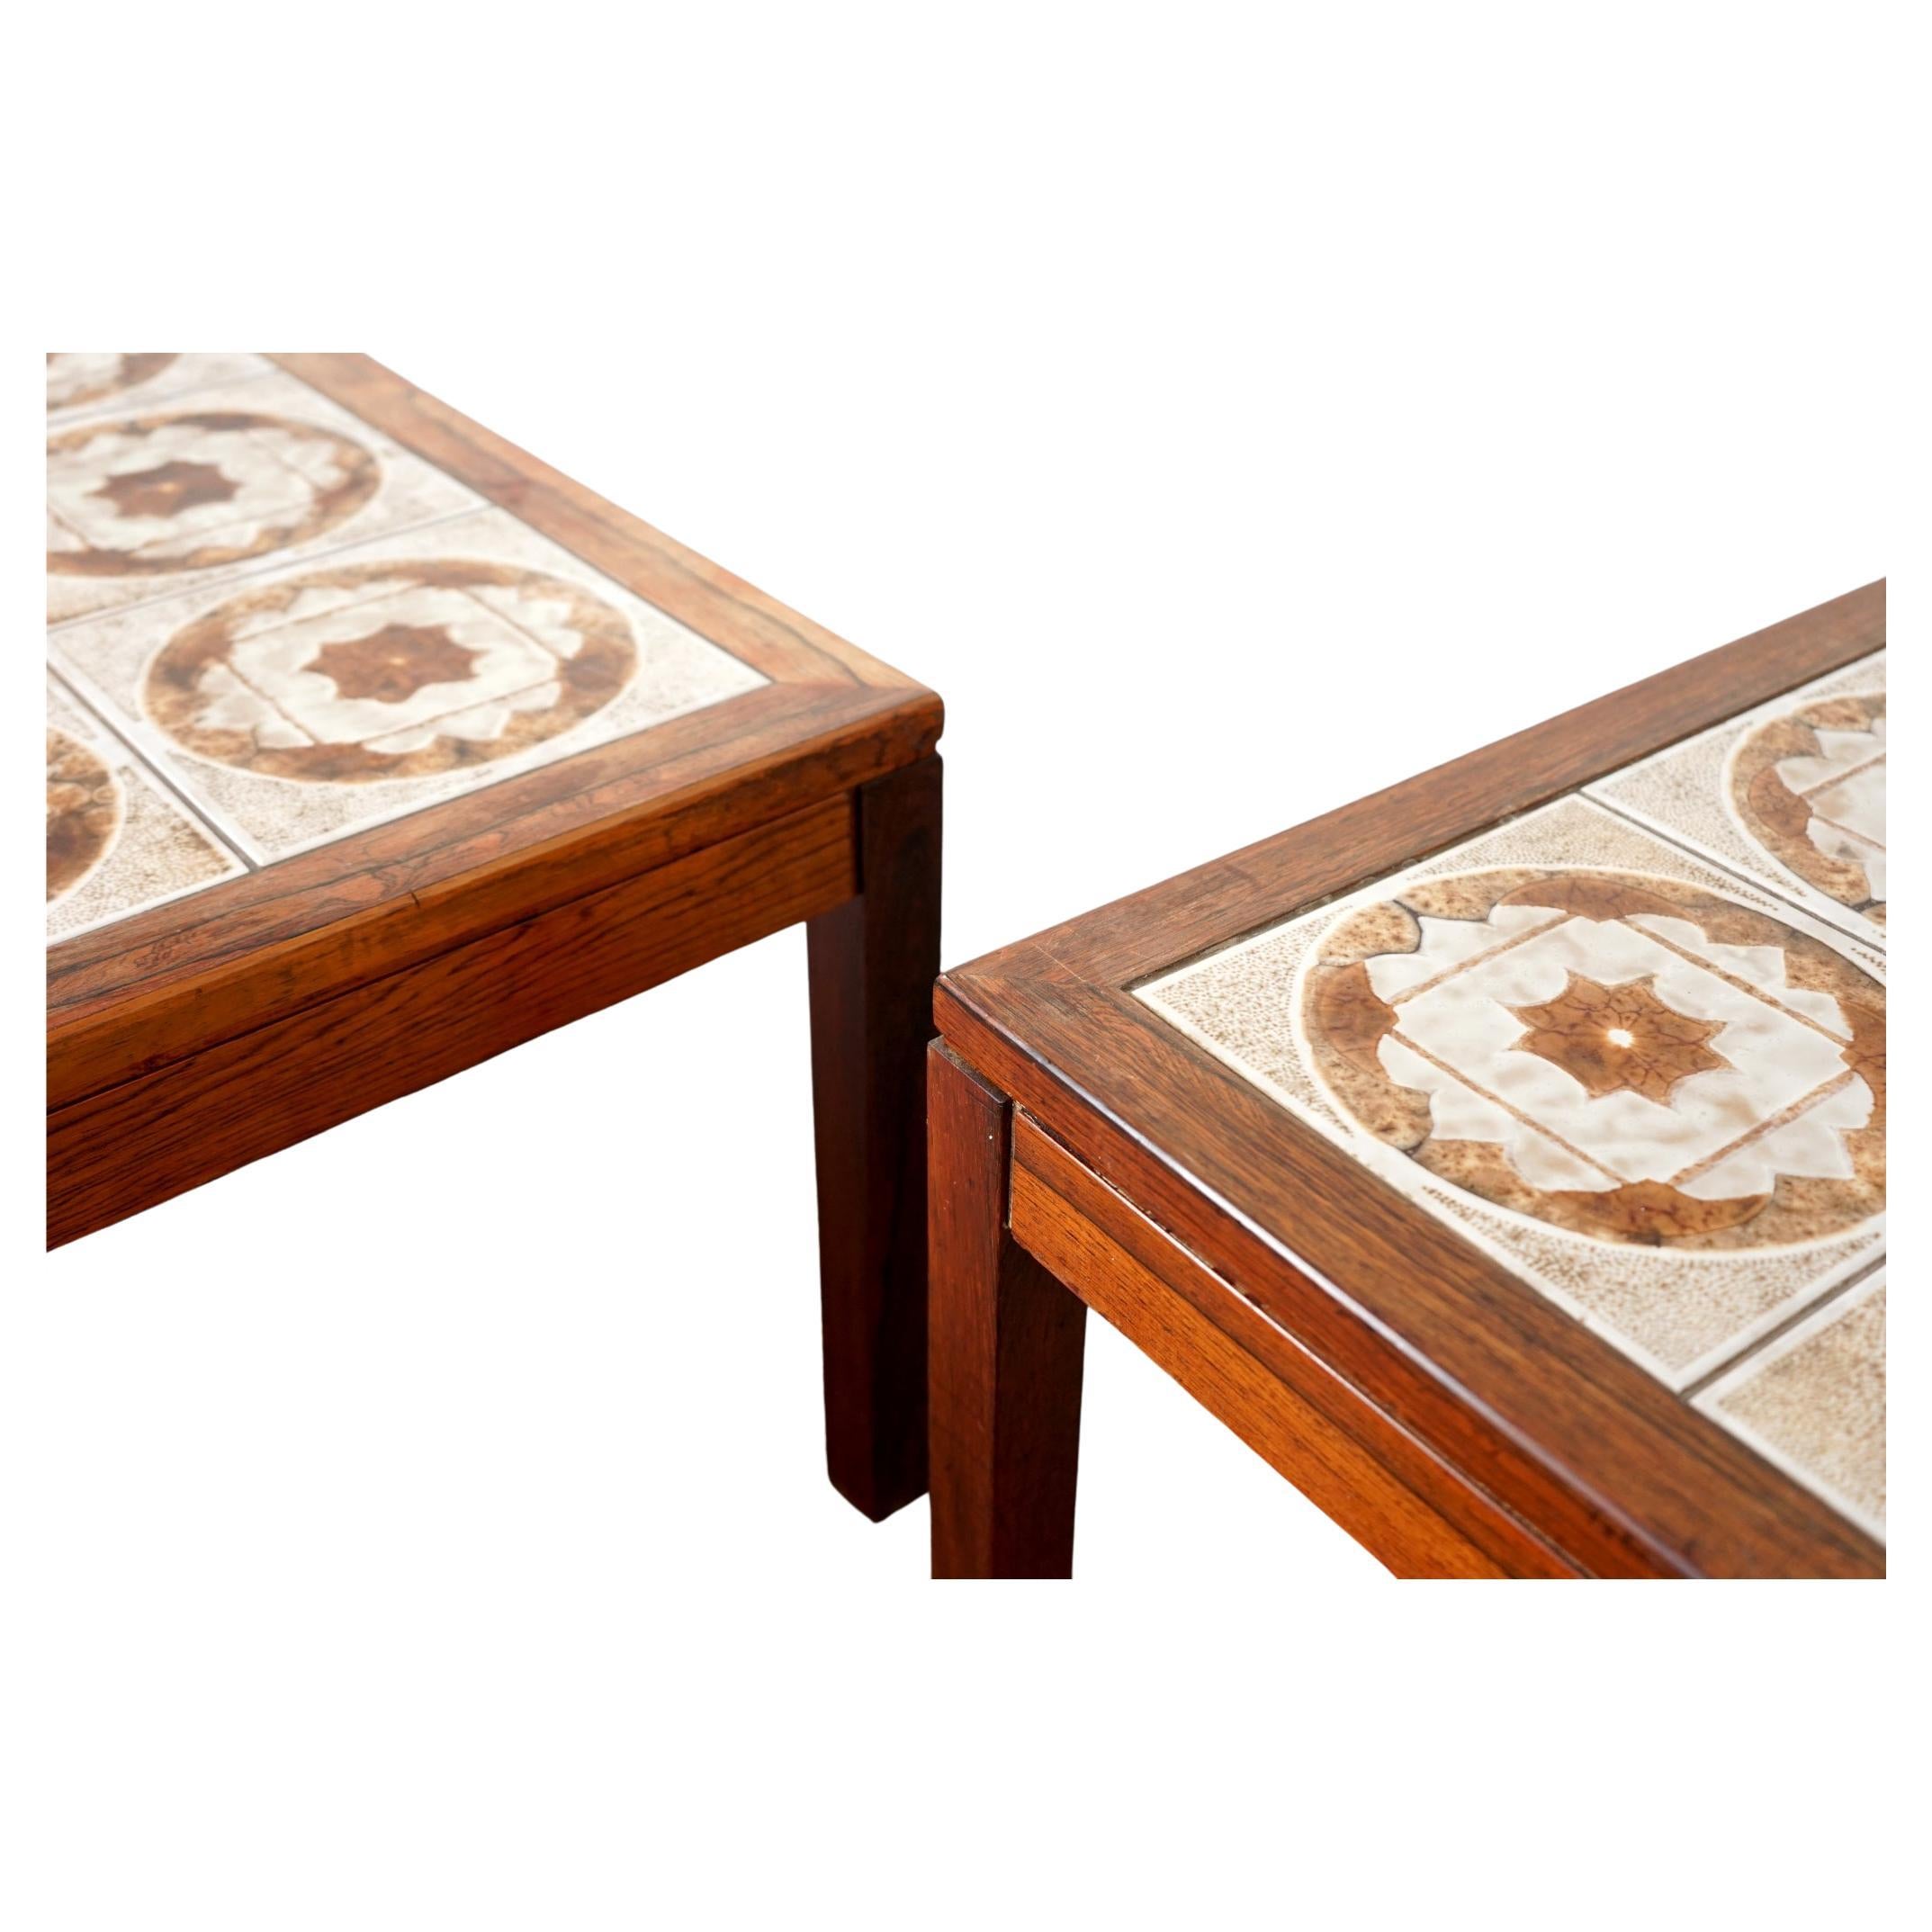 Pair of Danish Mid-Century Modern Rosewood & Tile Side Tables